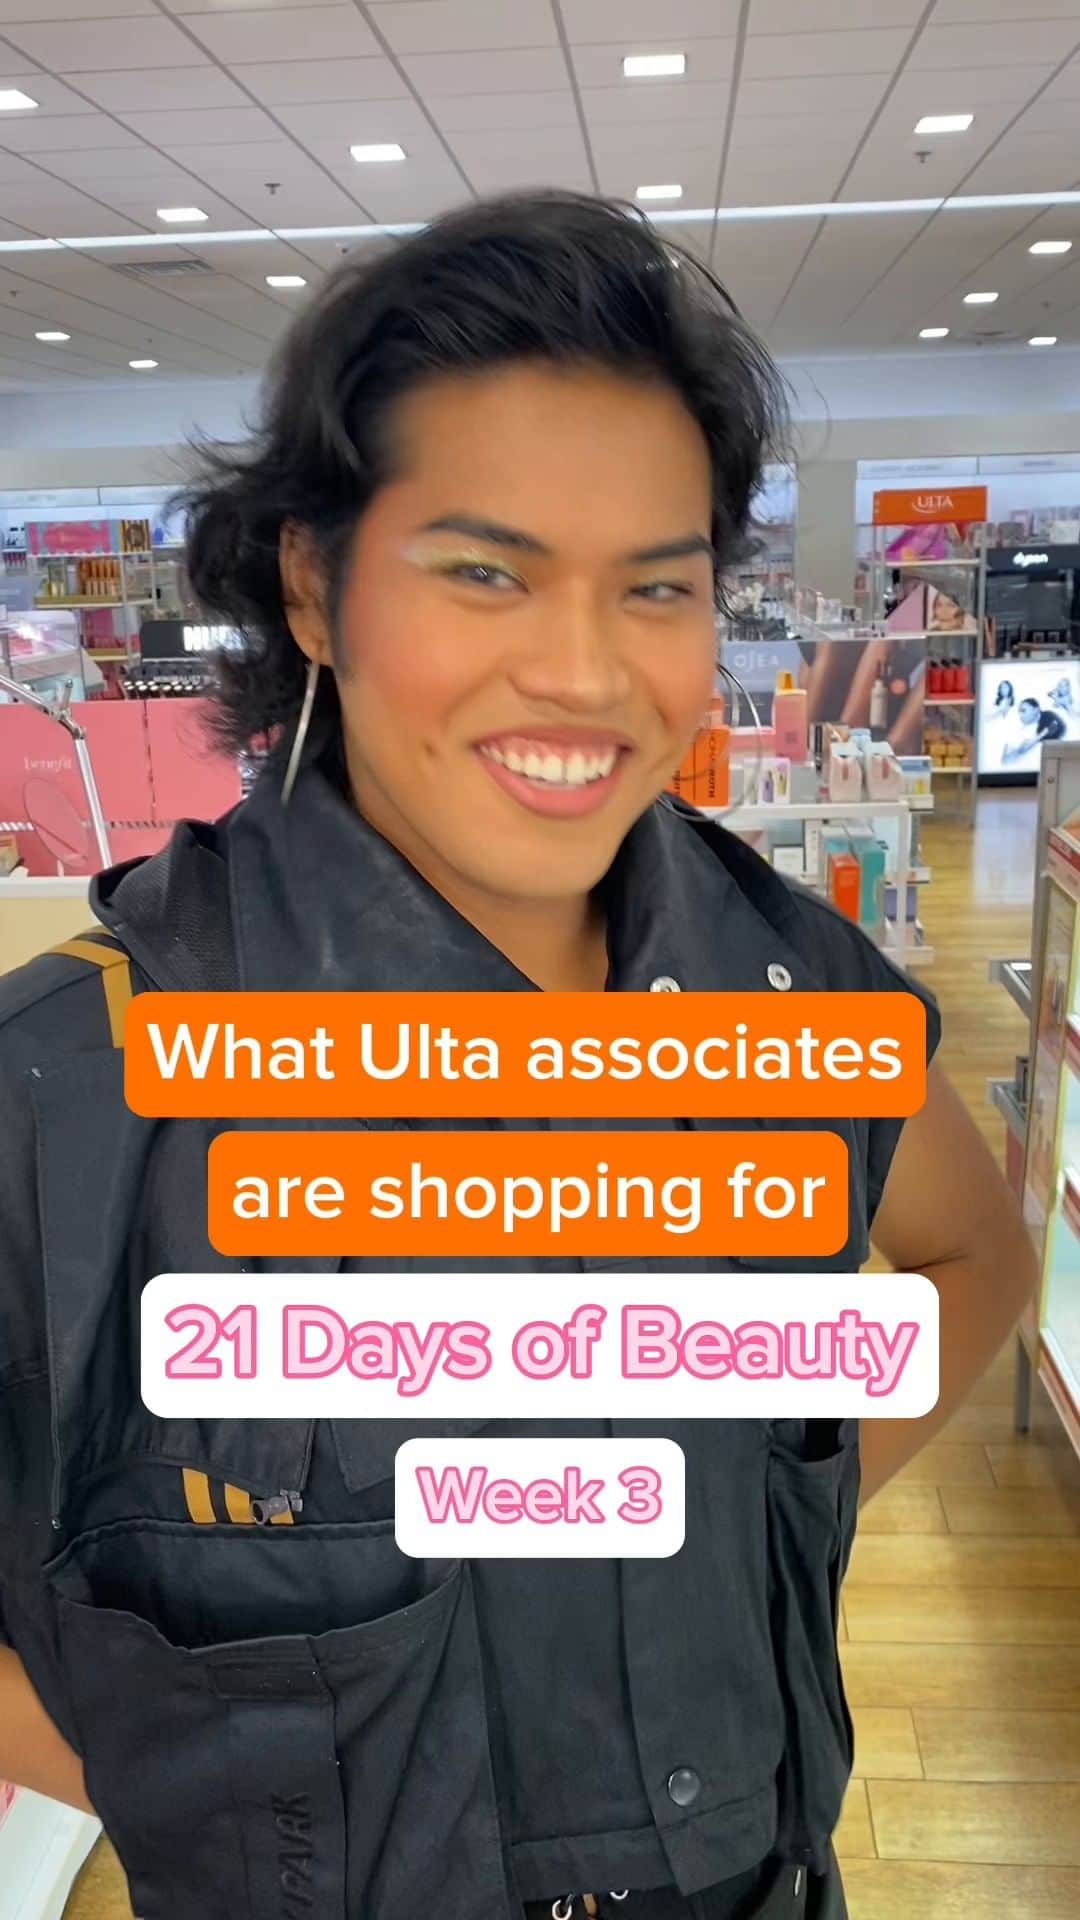 ULTA Beautyのインスタグラム：「You know they ✨know✨ Shop these associate-approved 21 Days of Beauty steals. #ultabeauty」